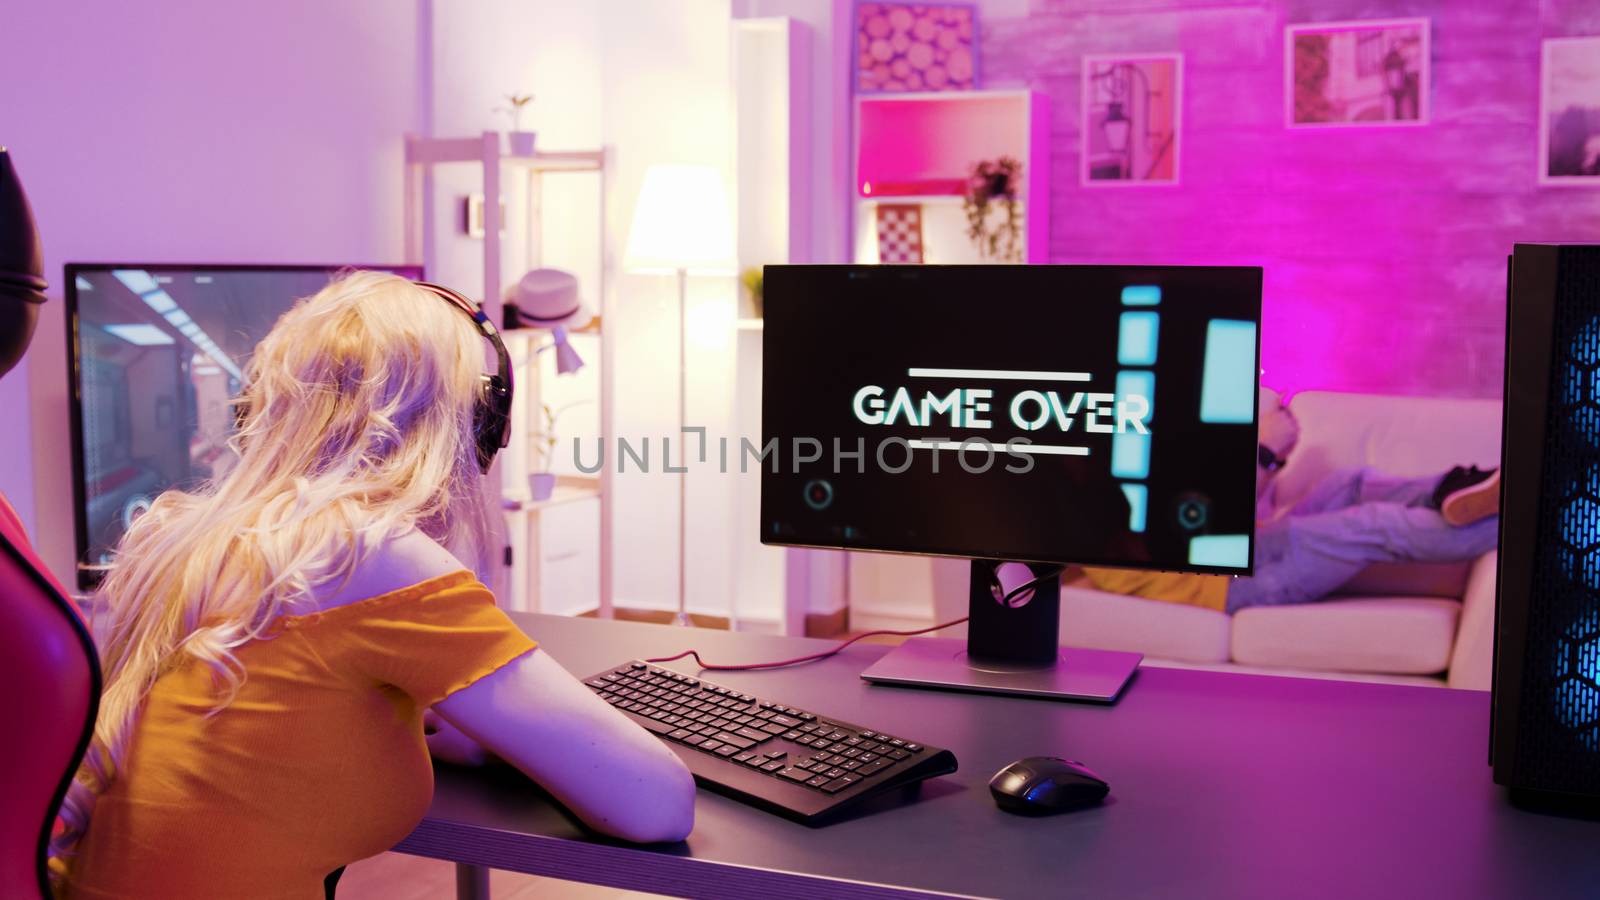 Sad blonde because she lost on a shooter game. Girl playing games and sitting on gaming chair.